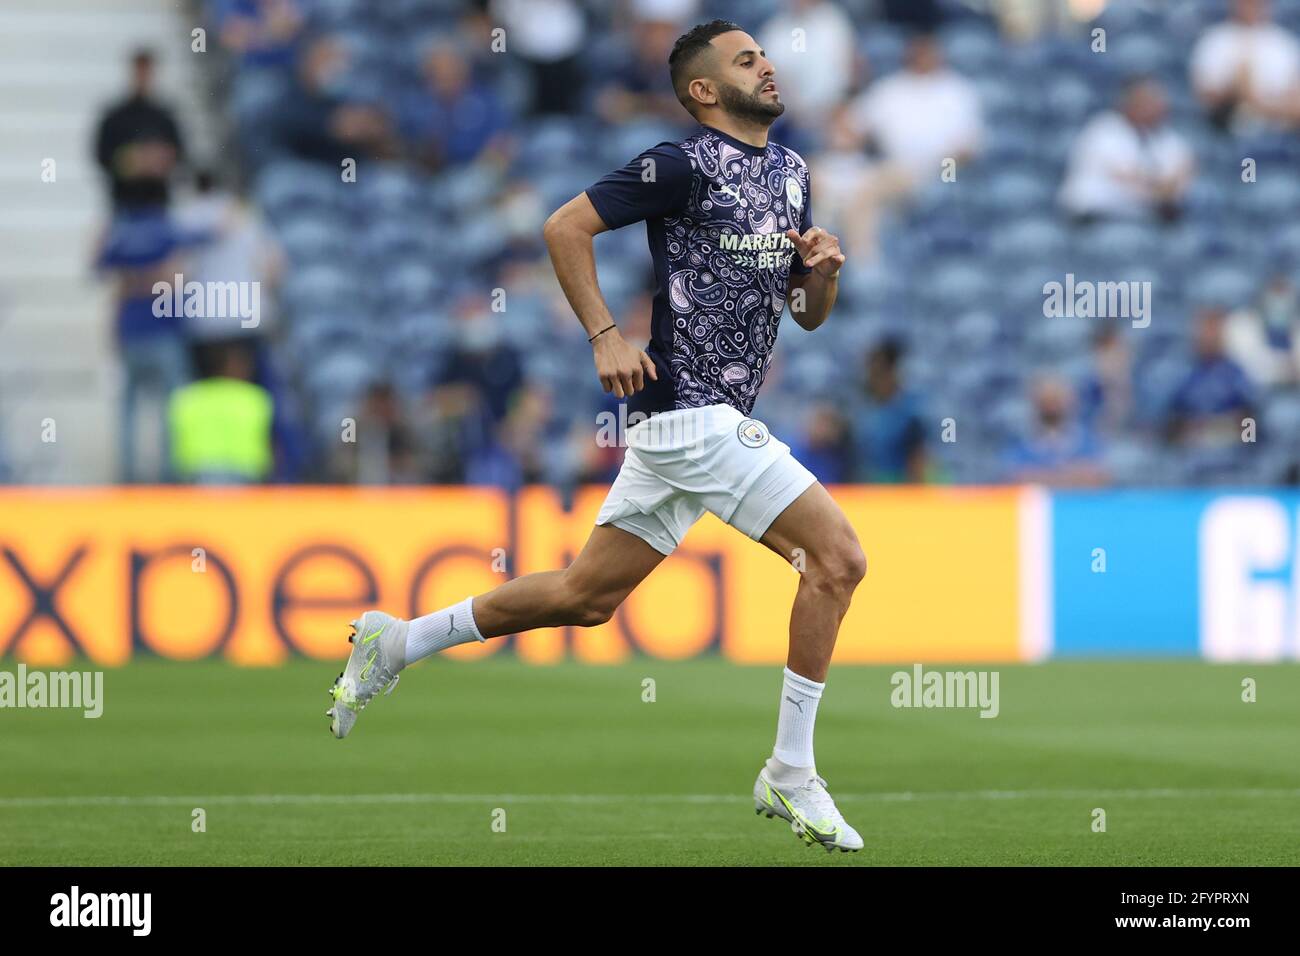 PORTO, PORTUGAL - MAY 29: Riyad Mahrez of Manchester City before the UEFA Champions League Final between Manchester City and Chelsea FC at Estadio do Dragao on May 29, 2021 in Porto, Portugal. (Photo by MB Media) Stock Photo